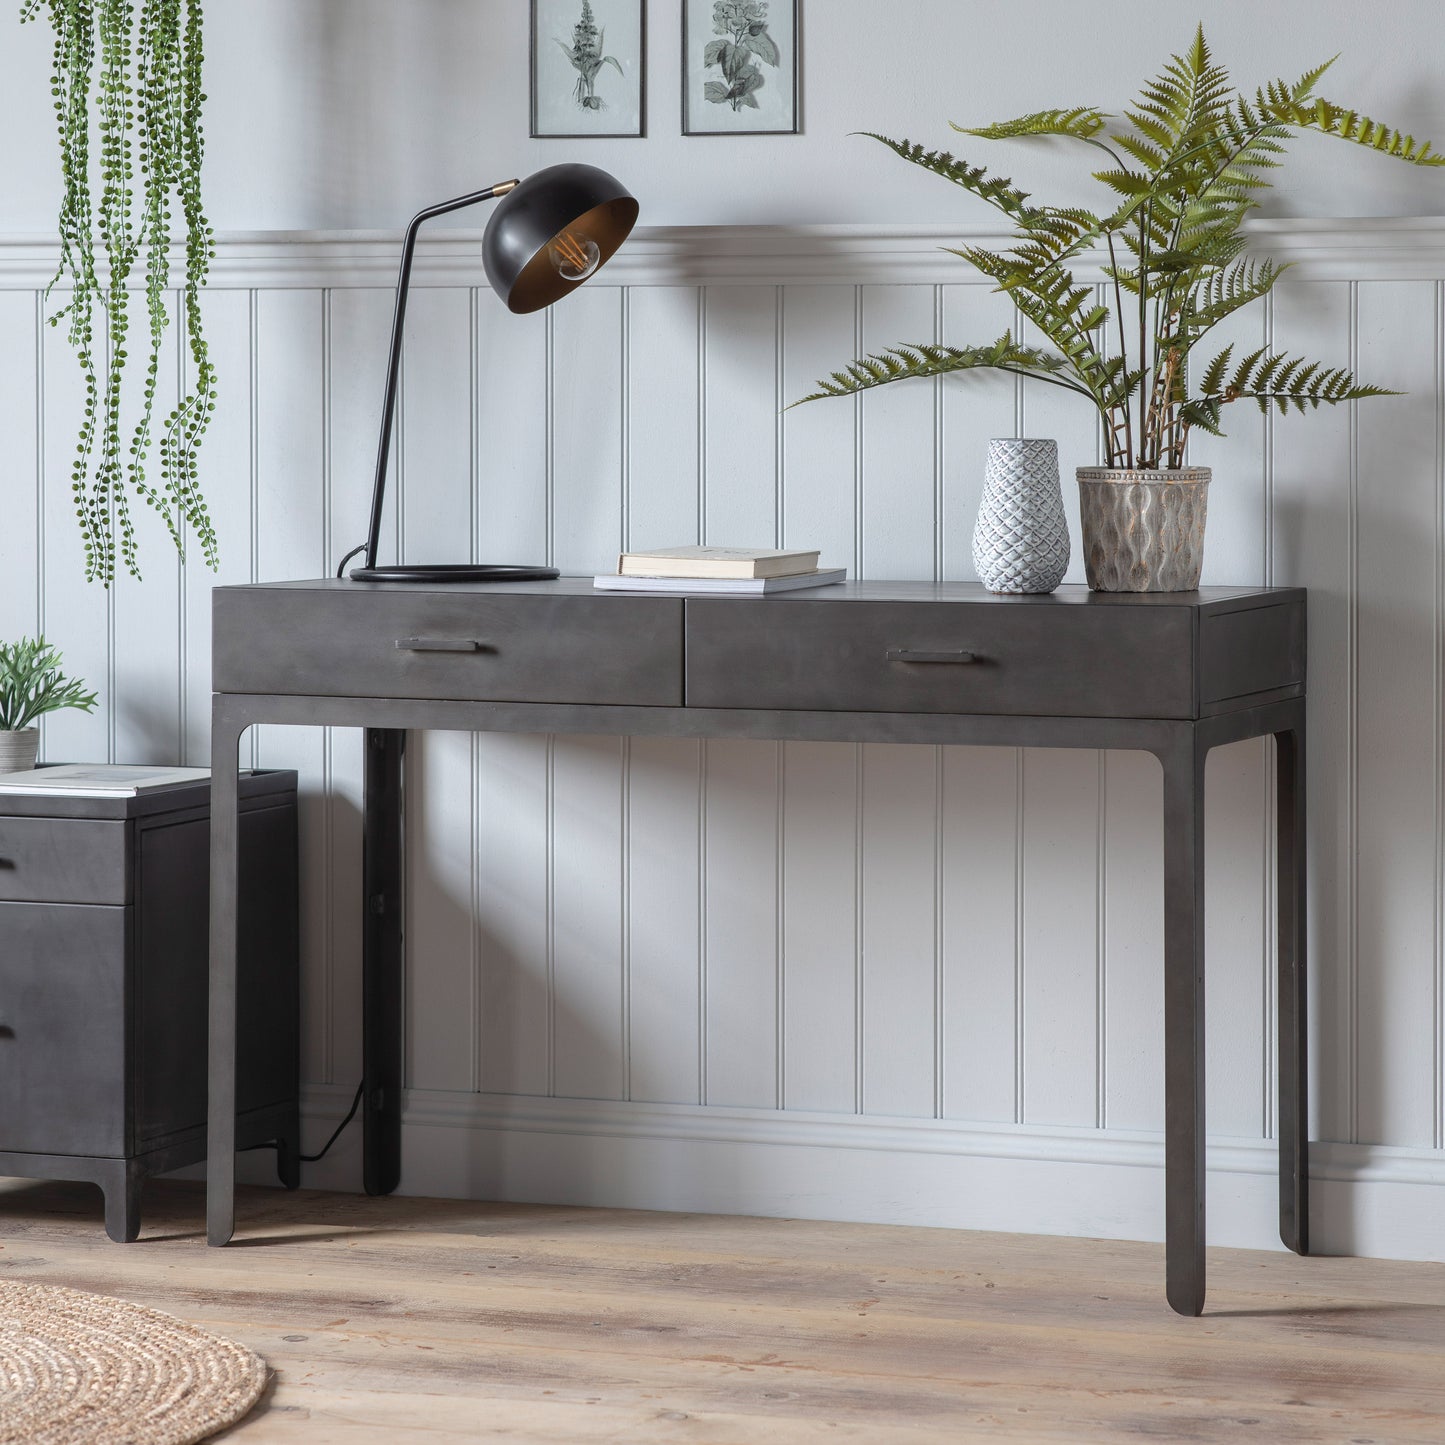 A grey Ottinge 2 Drawer Desk 1200x450x790mm with two drawers and a plant for interior decor.